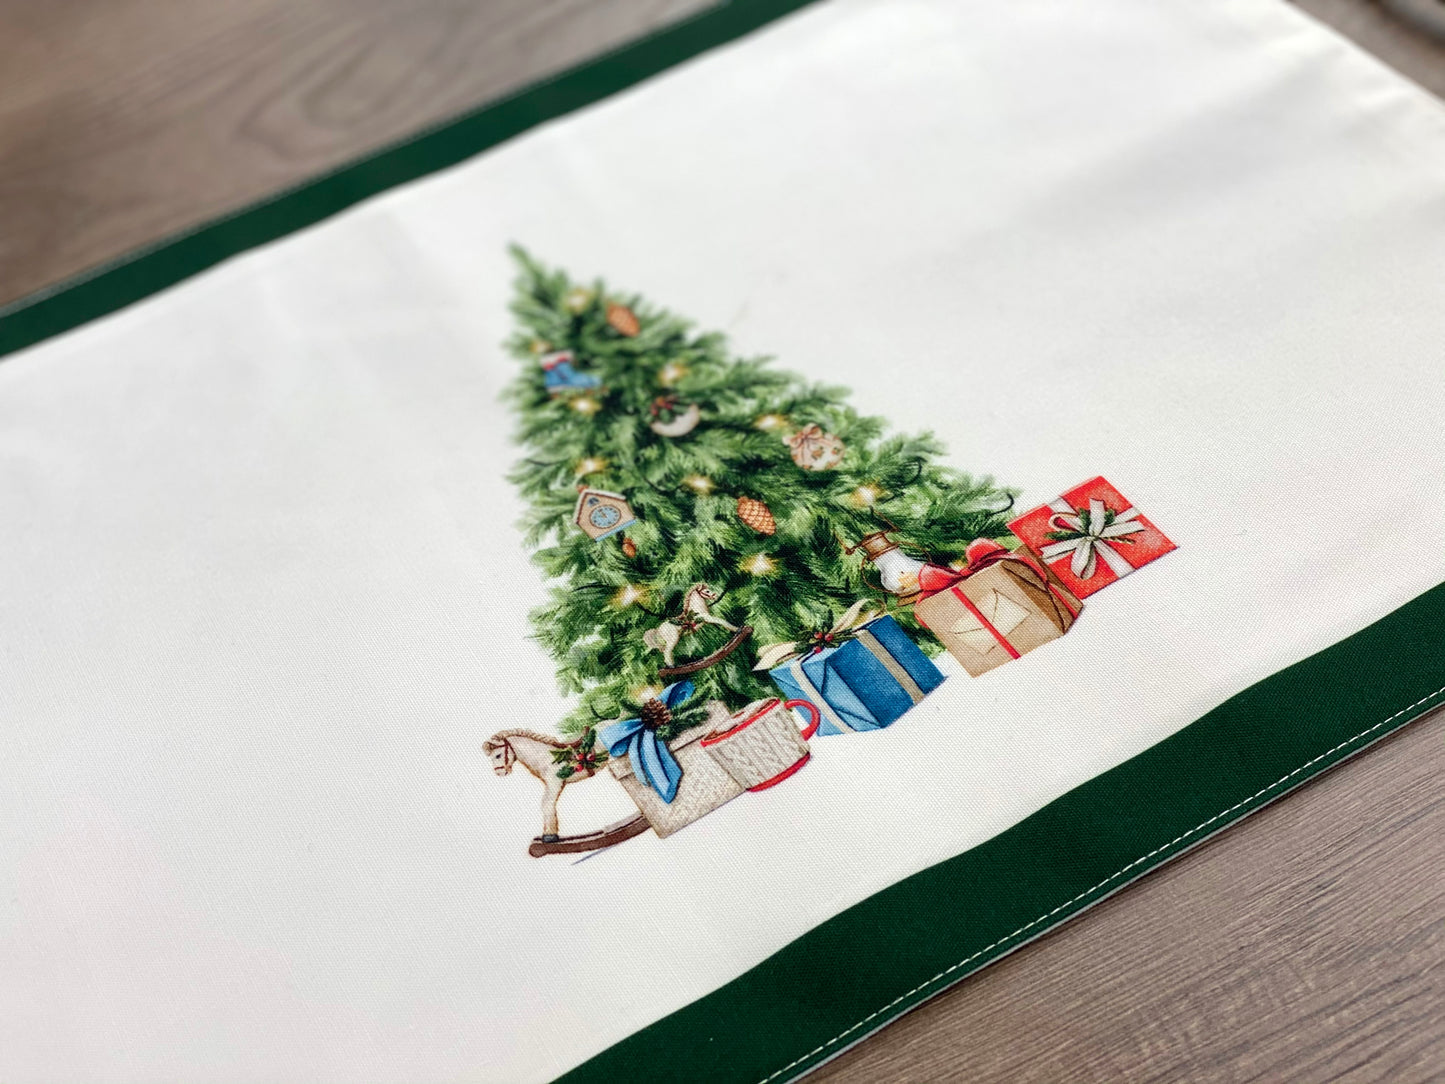 Set of 4 Christmas tree placemat, vintage holiday green Christmas tree with toys and present boxes, Machine washable Placemat